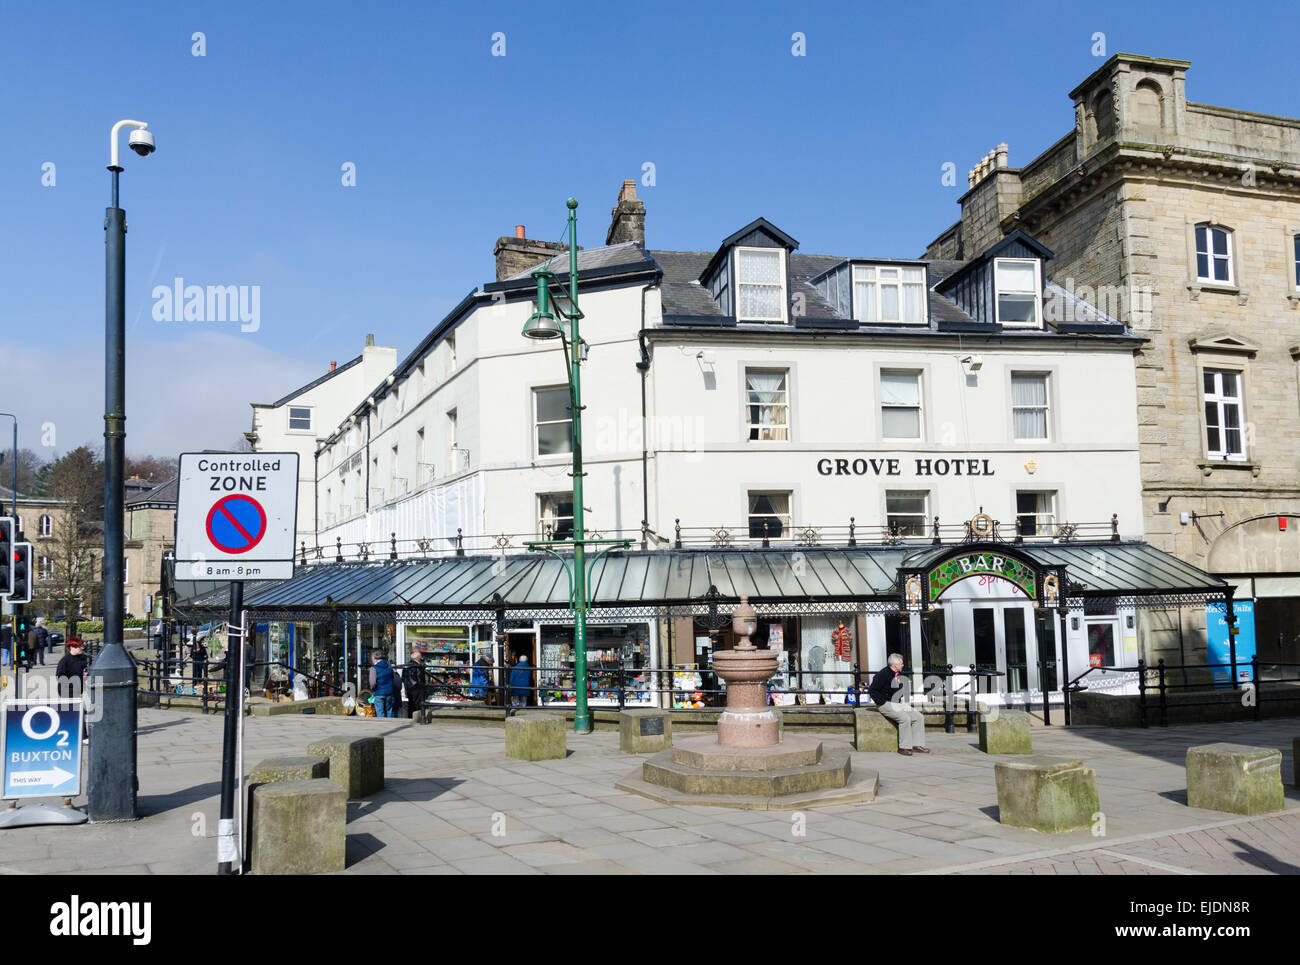 The Grove Hotel building on the corner of Spring Gardens in the Derbyshire spa town of Buxton Stock Photo